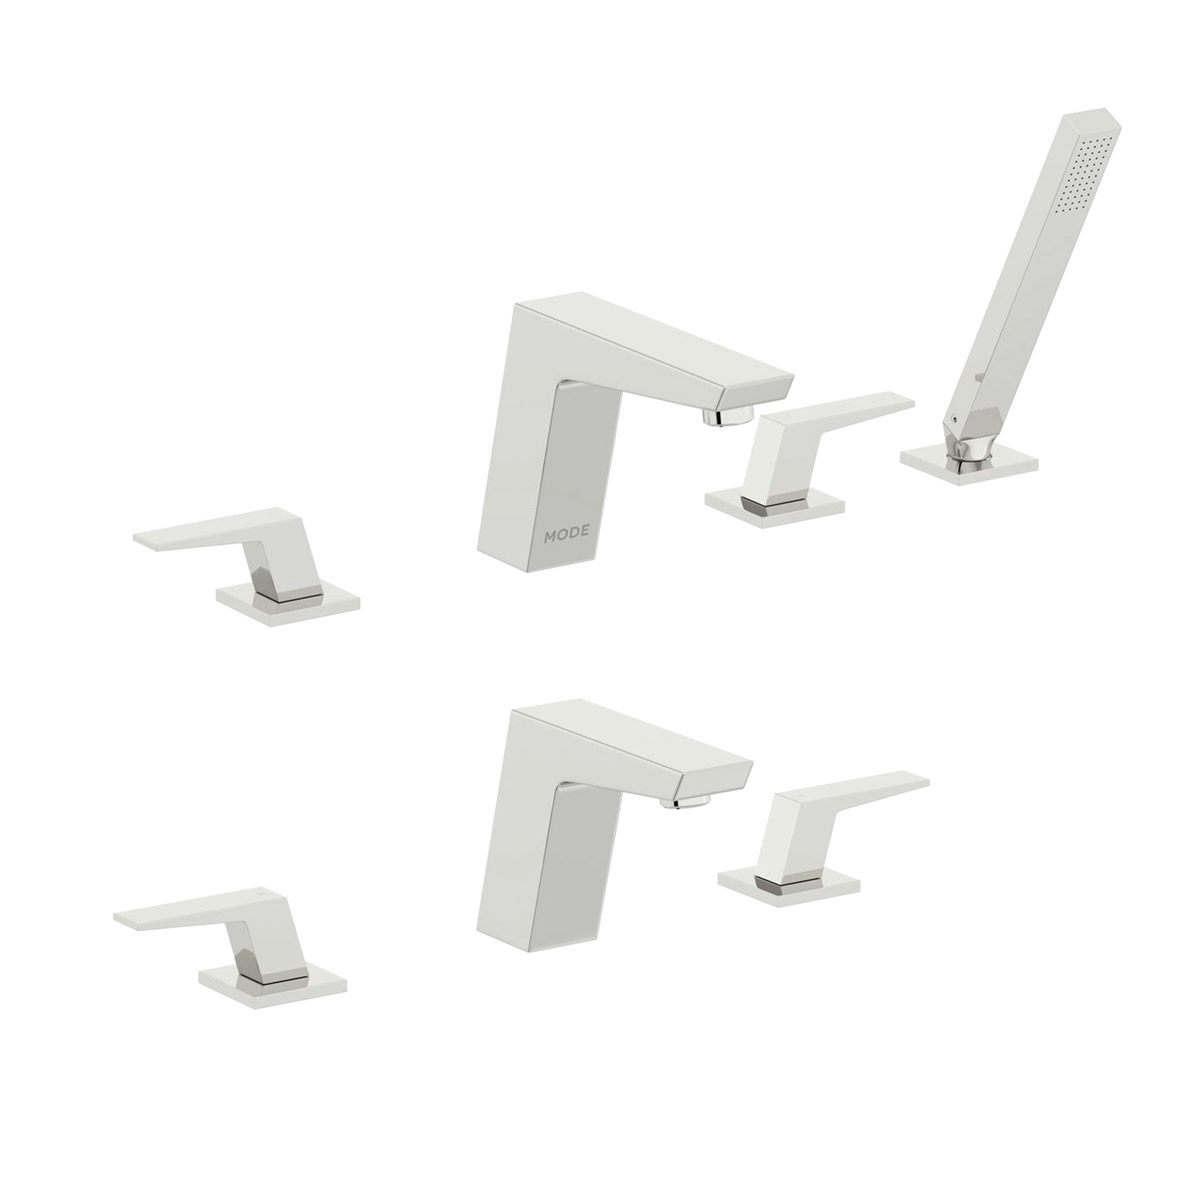 Mode Carter 3 hole basin and 4 hole bath shower mixer tap pack